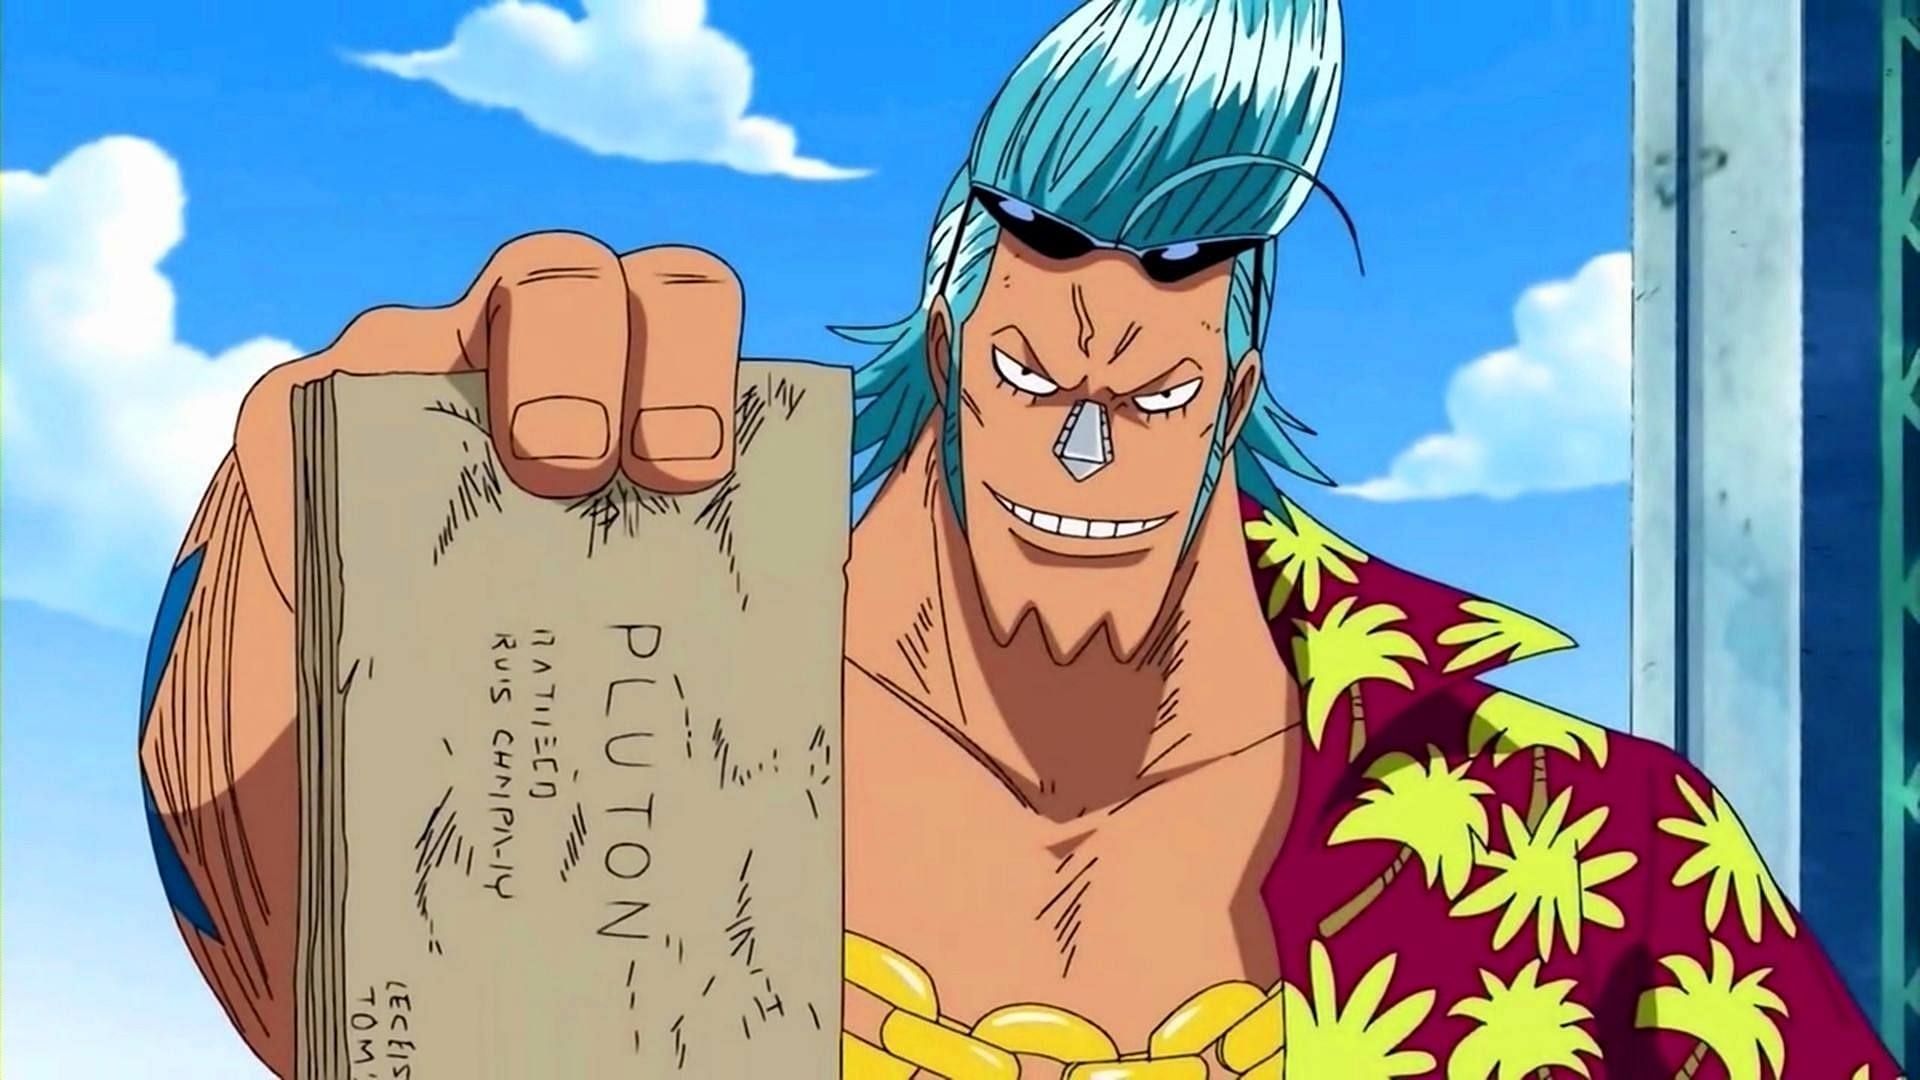 The debut of Pluton may have actually introduced fans to 2 of the 3 Ancient Weapons based on One Piece Chapter 1060